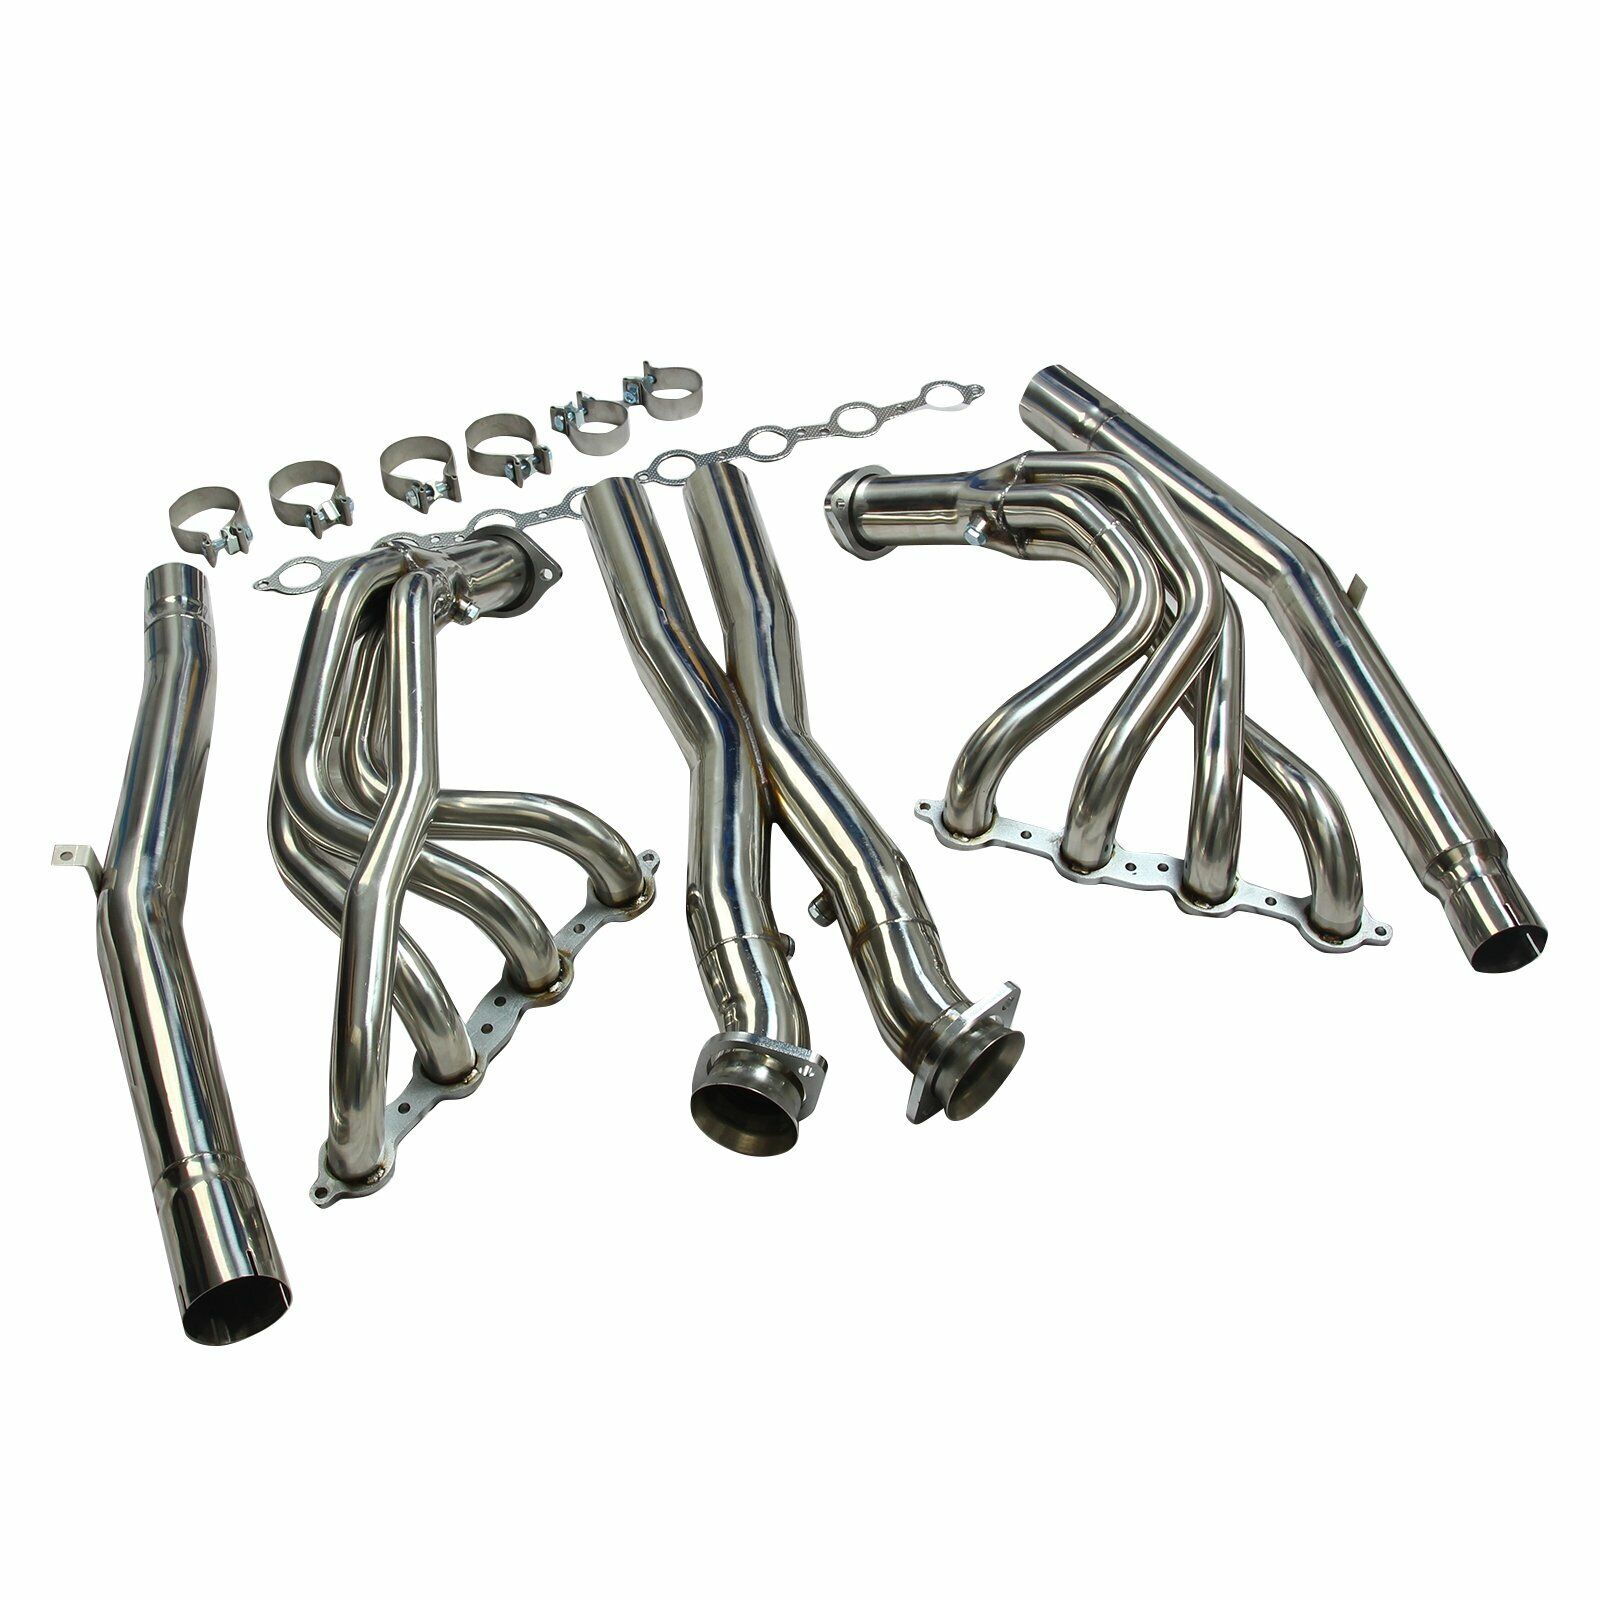 For 05-13 Chevy Corvette C6 LS2 LS3 Stainless Exhaust Headers Manifolds & X Pipe